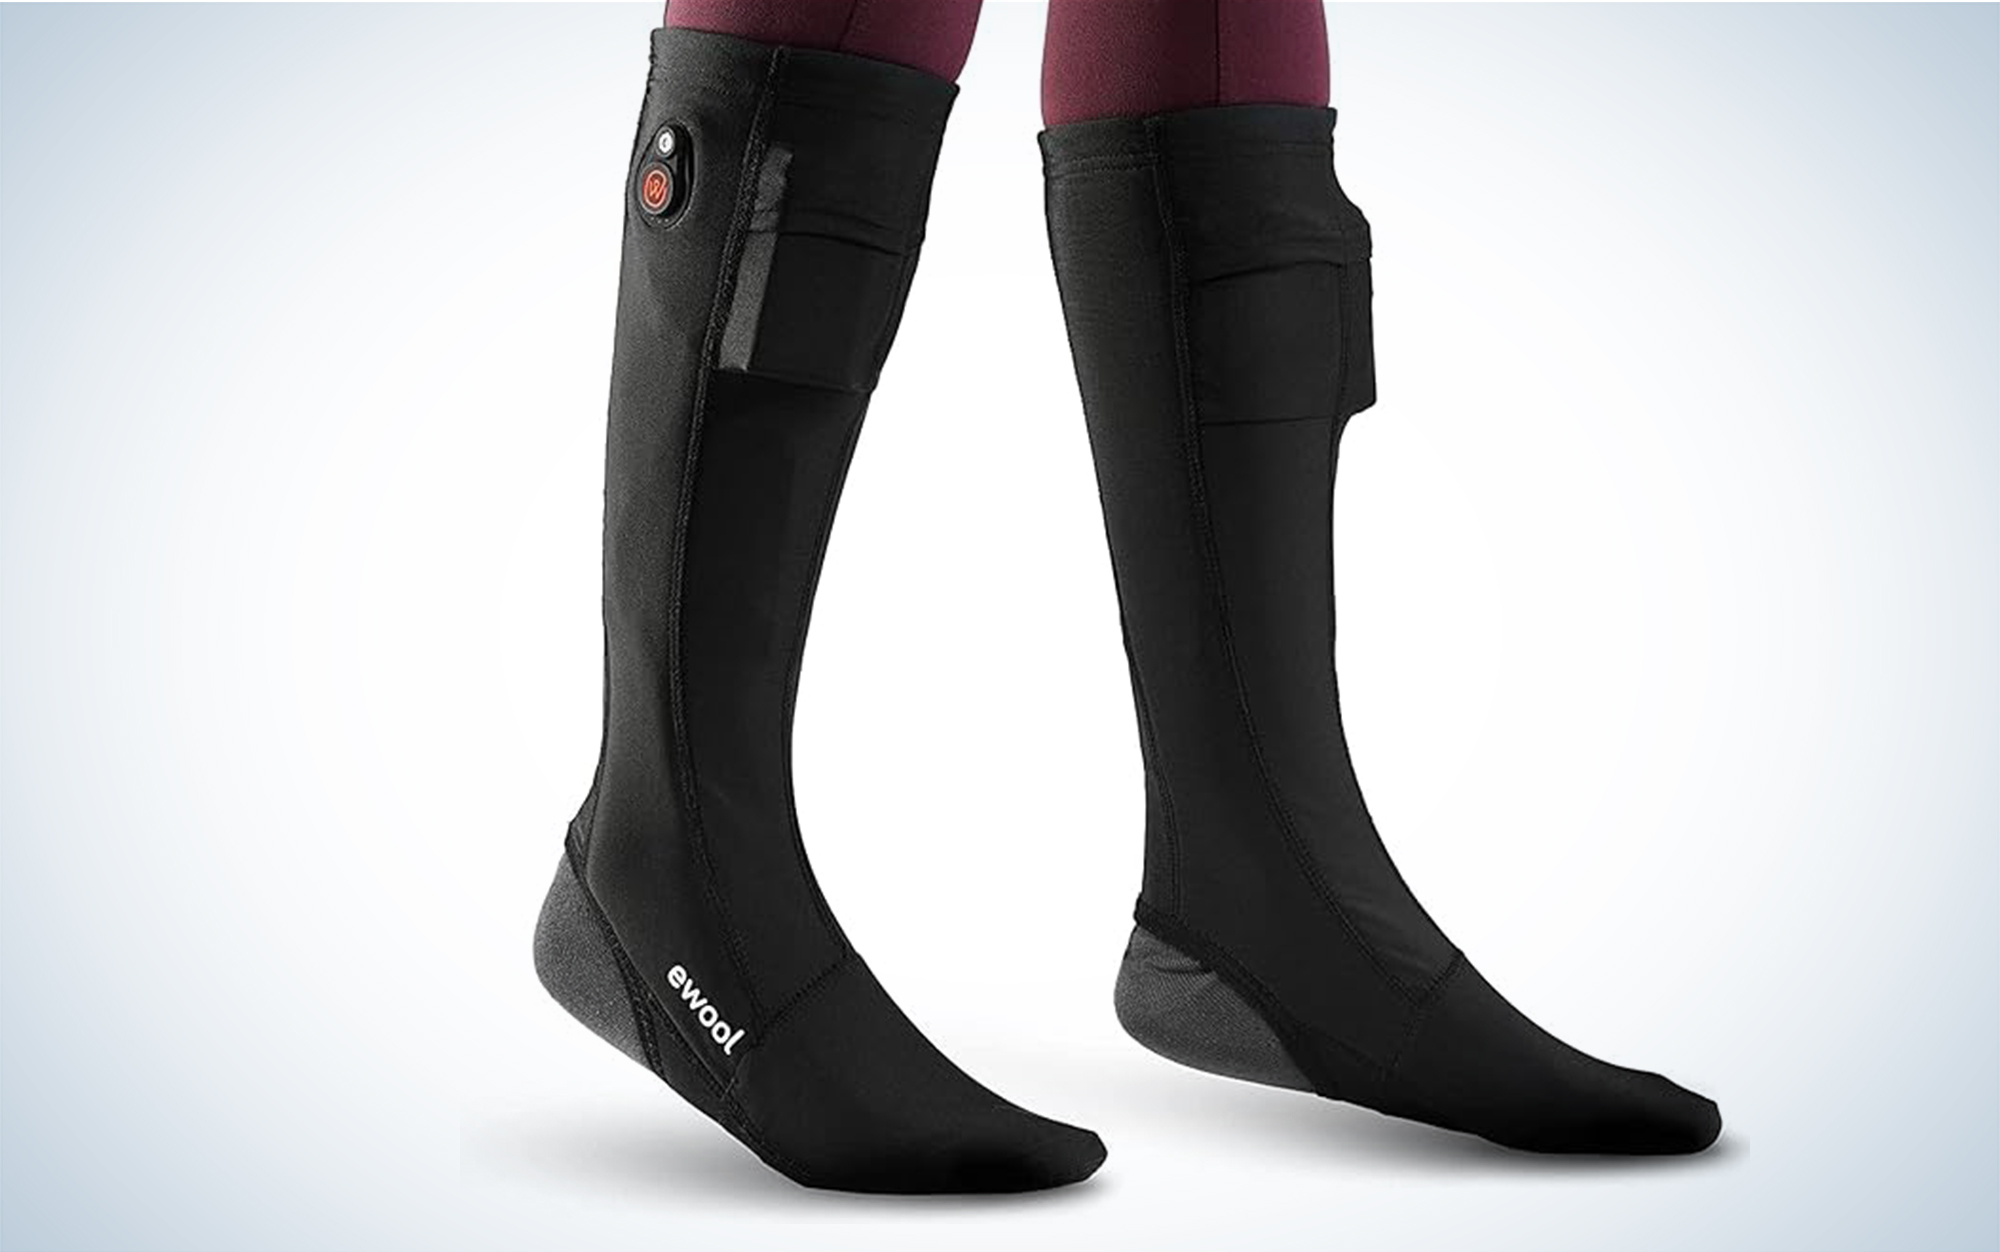 eWool Heated Sock Covers with SnapConnect